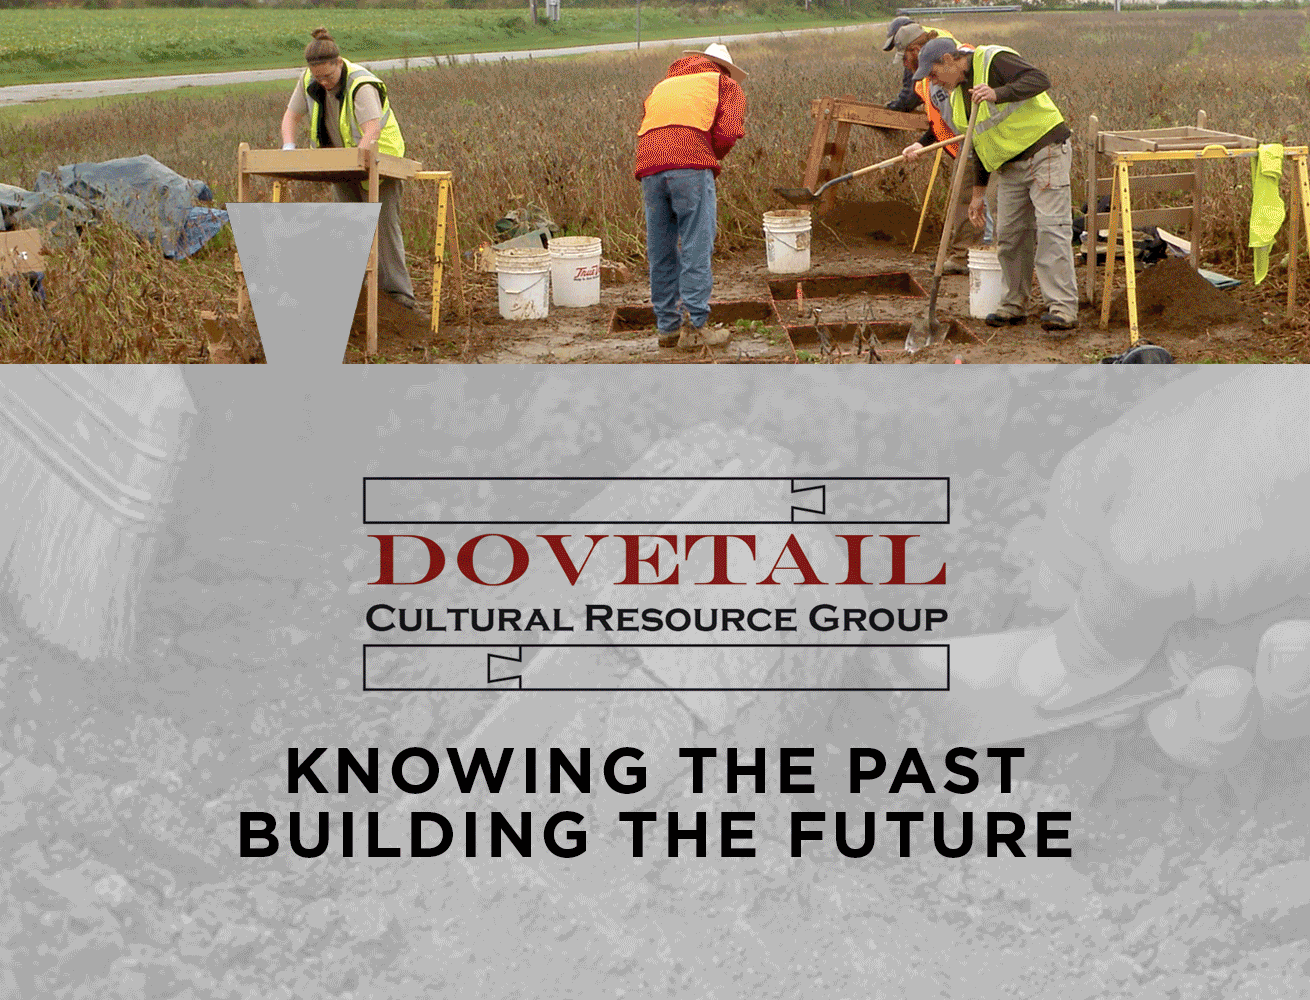 Dovetail Cultural Resource Group